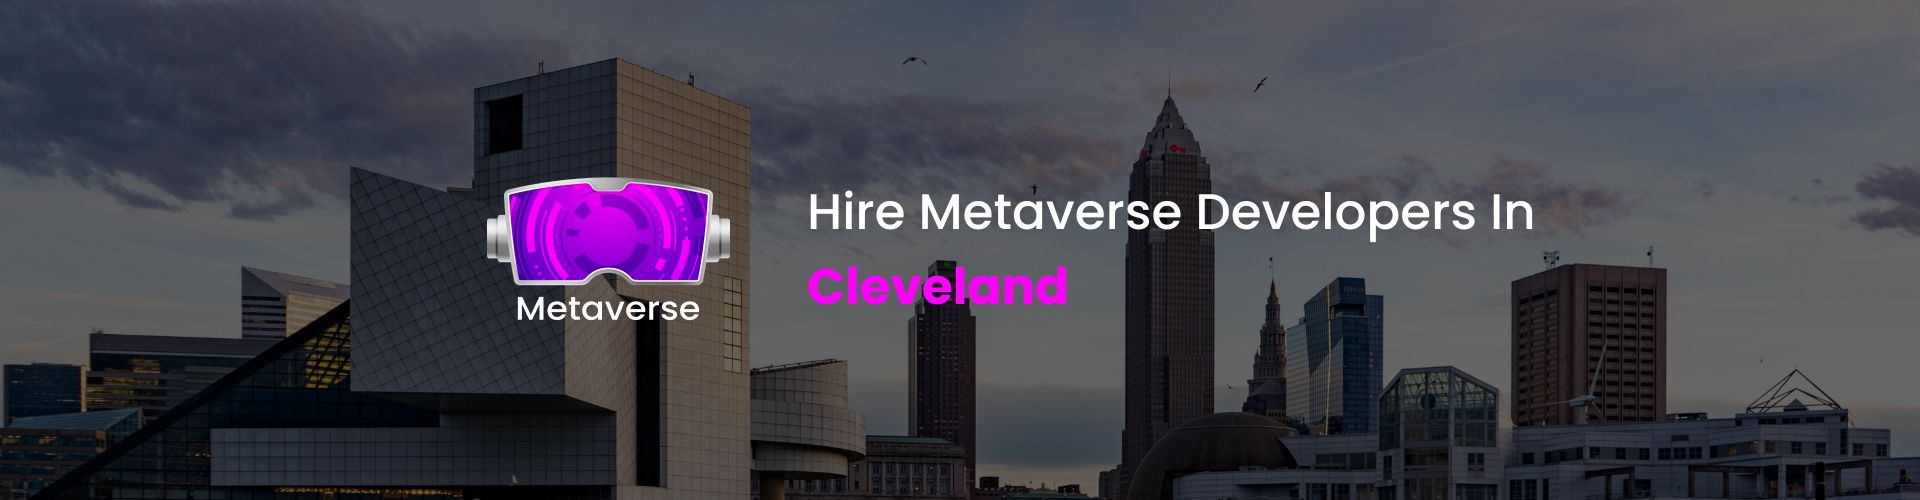 metaverse developers in cleveland